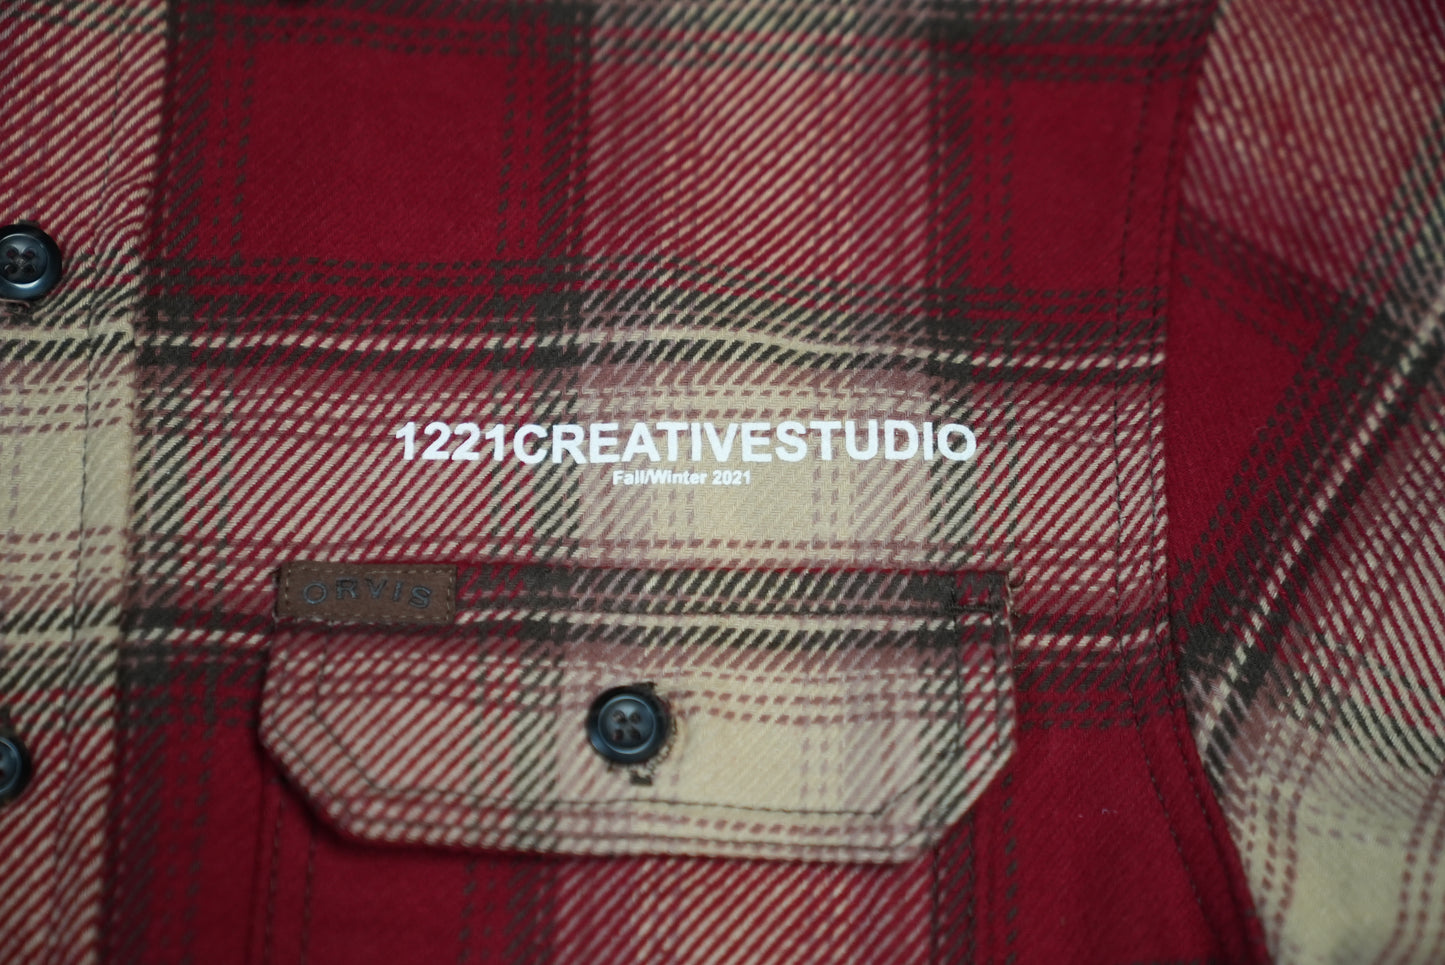 1221 movies don't create psychos - Flannel (Heavyweight w/deep pockets) - Red or Green